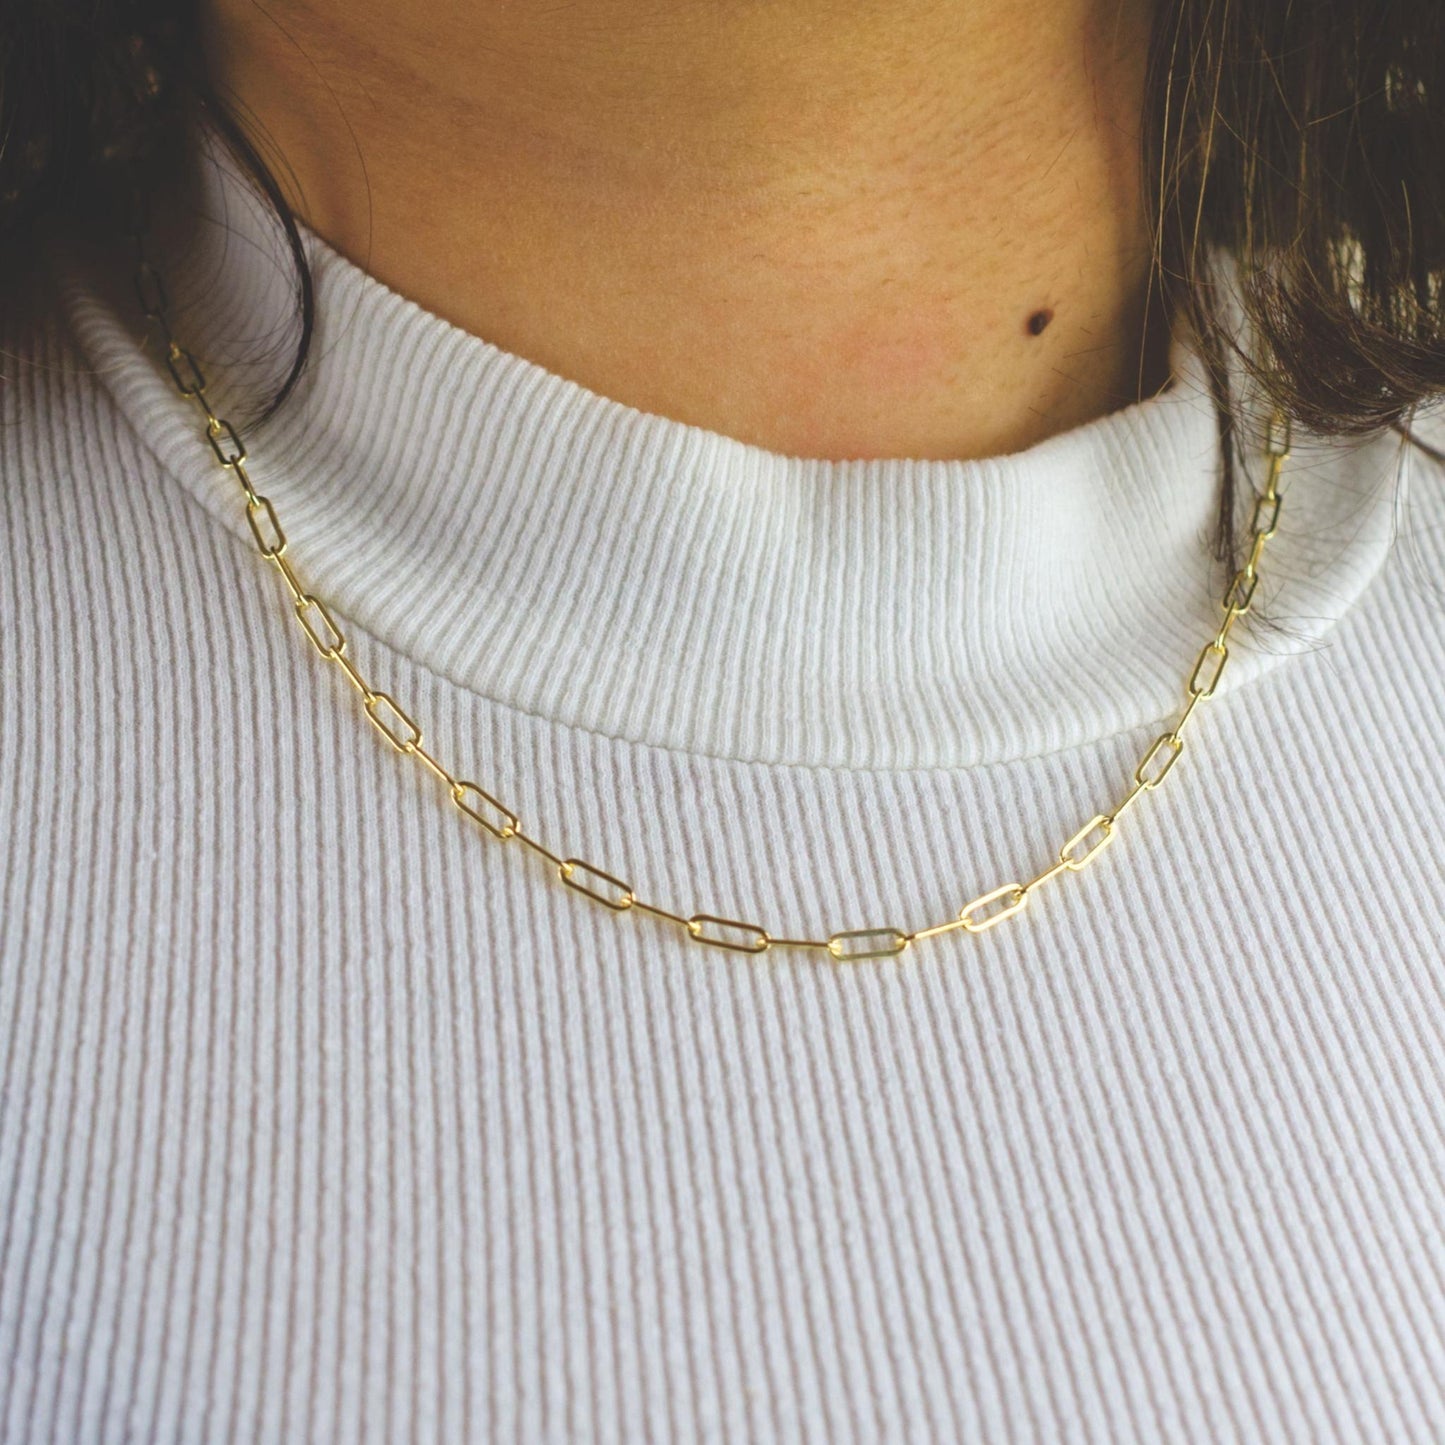 Woman wearing a 14K gold fill paperclip chain necklace with classic style (large) link size